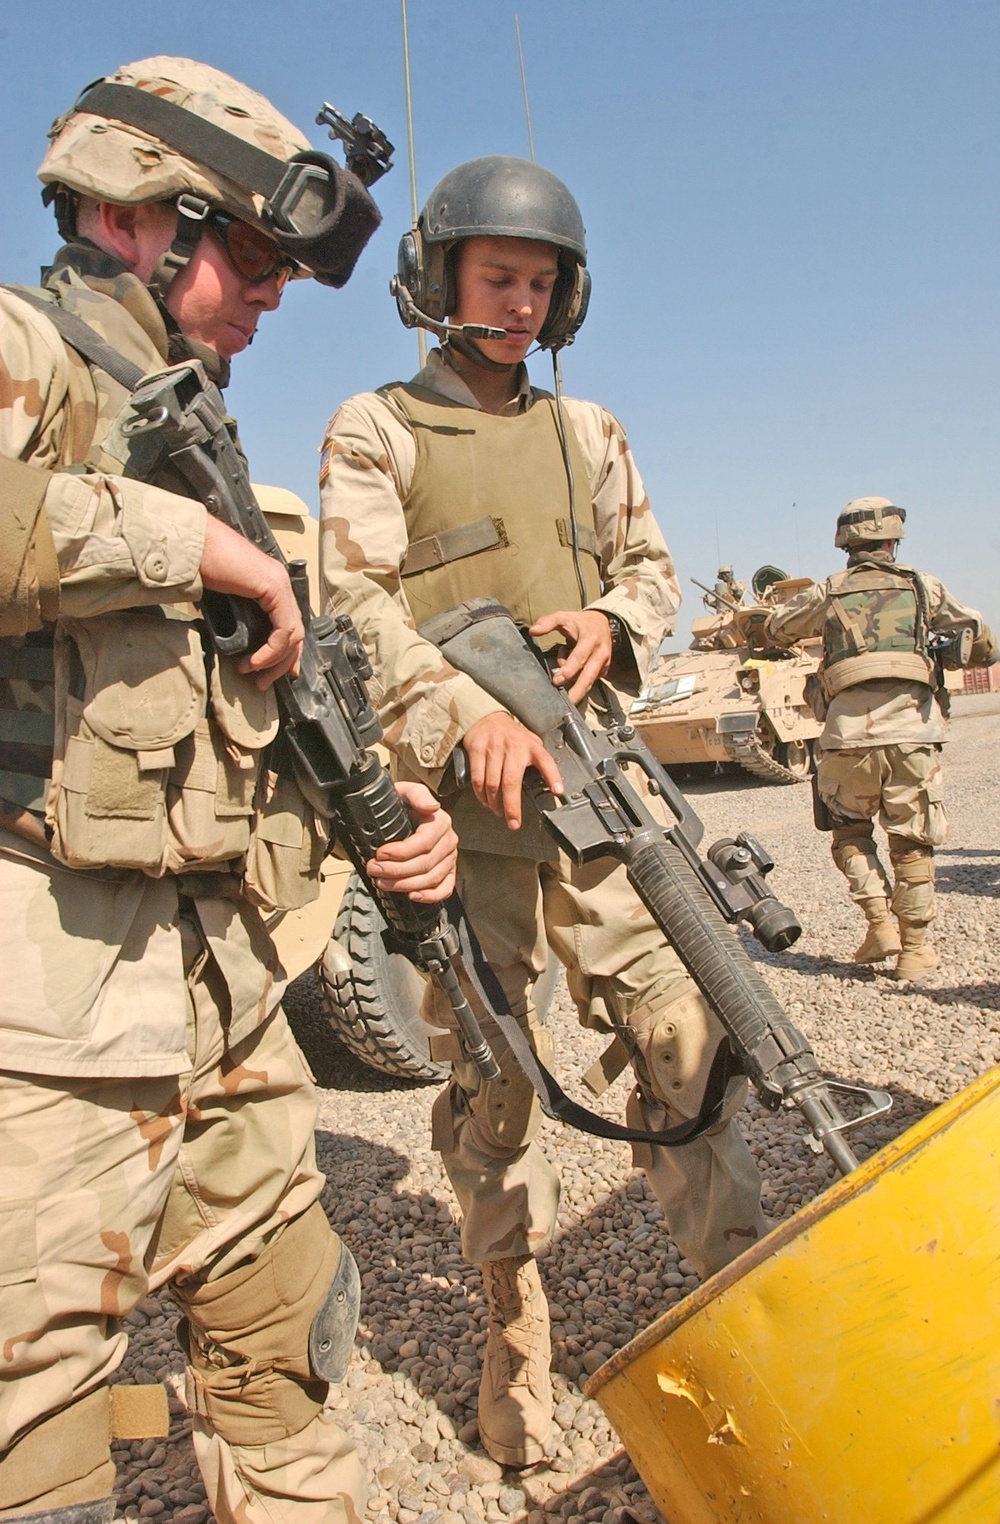 Staff Sgt. White and Spc. Liles clear their weapons